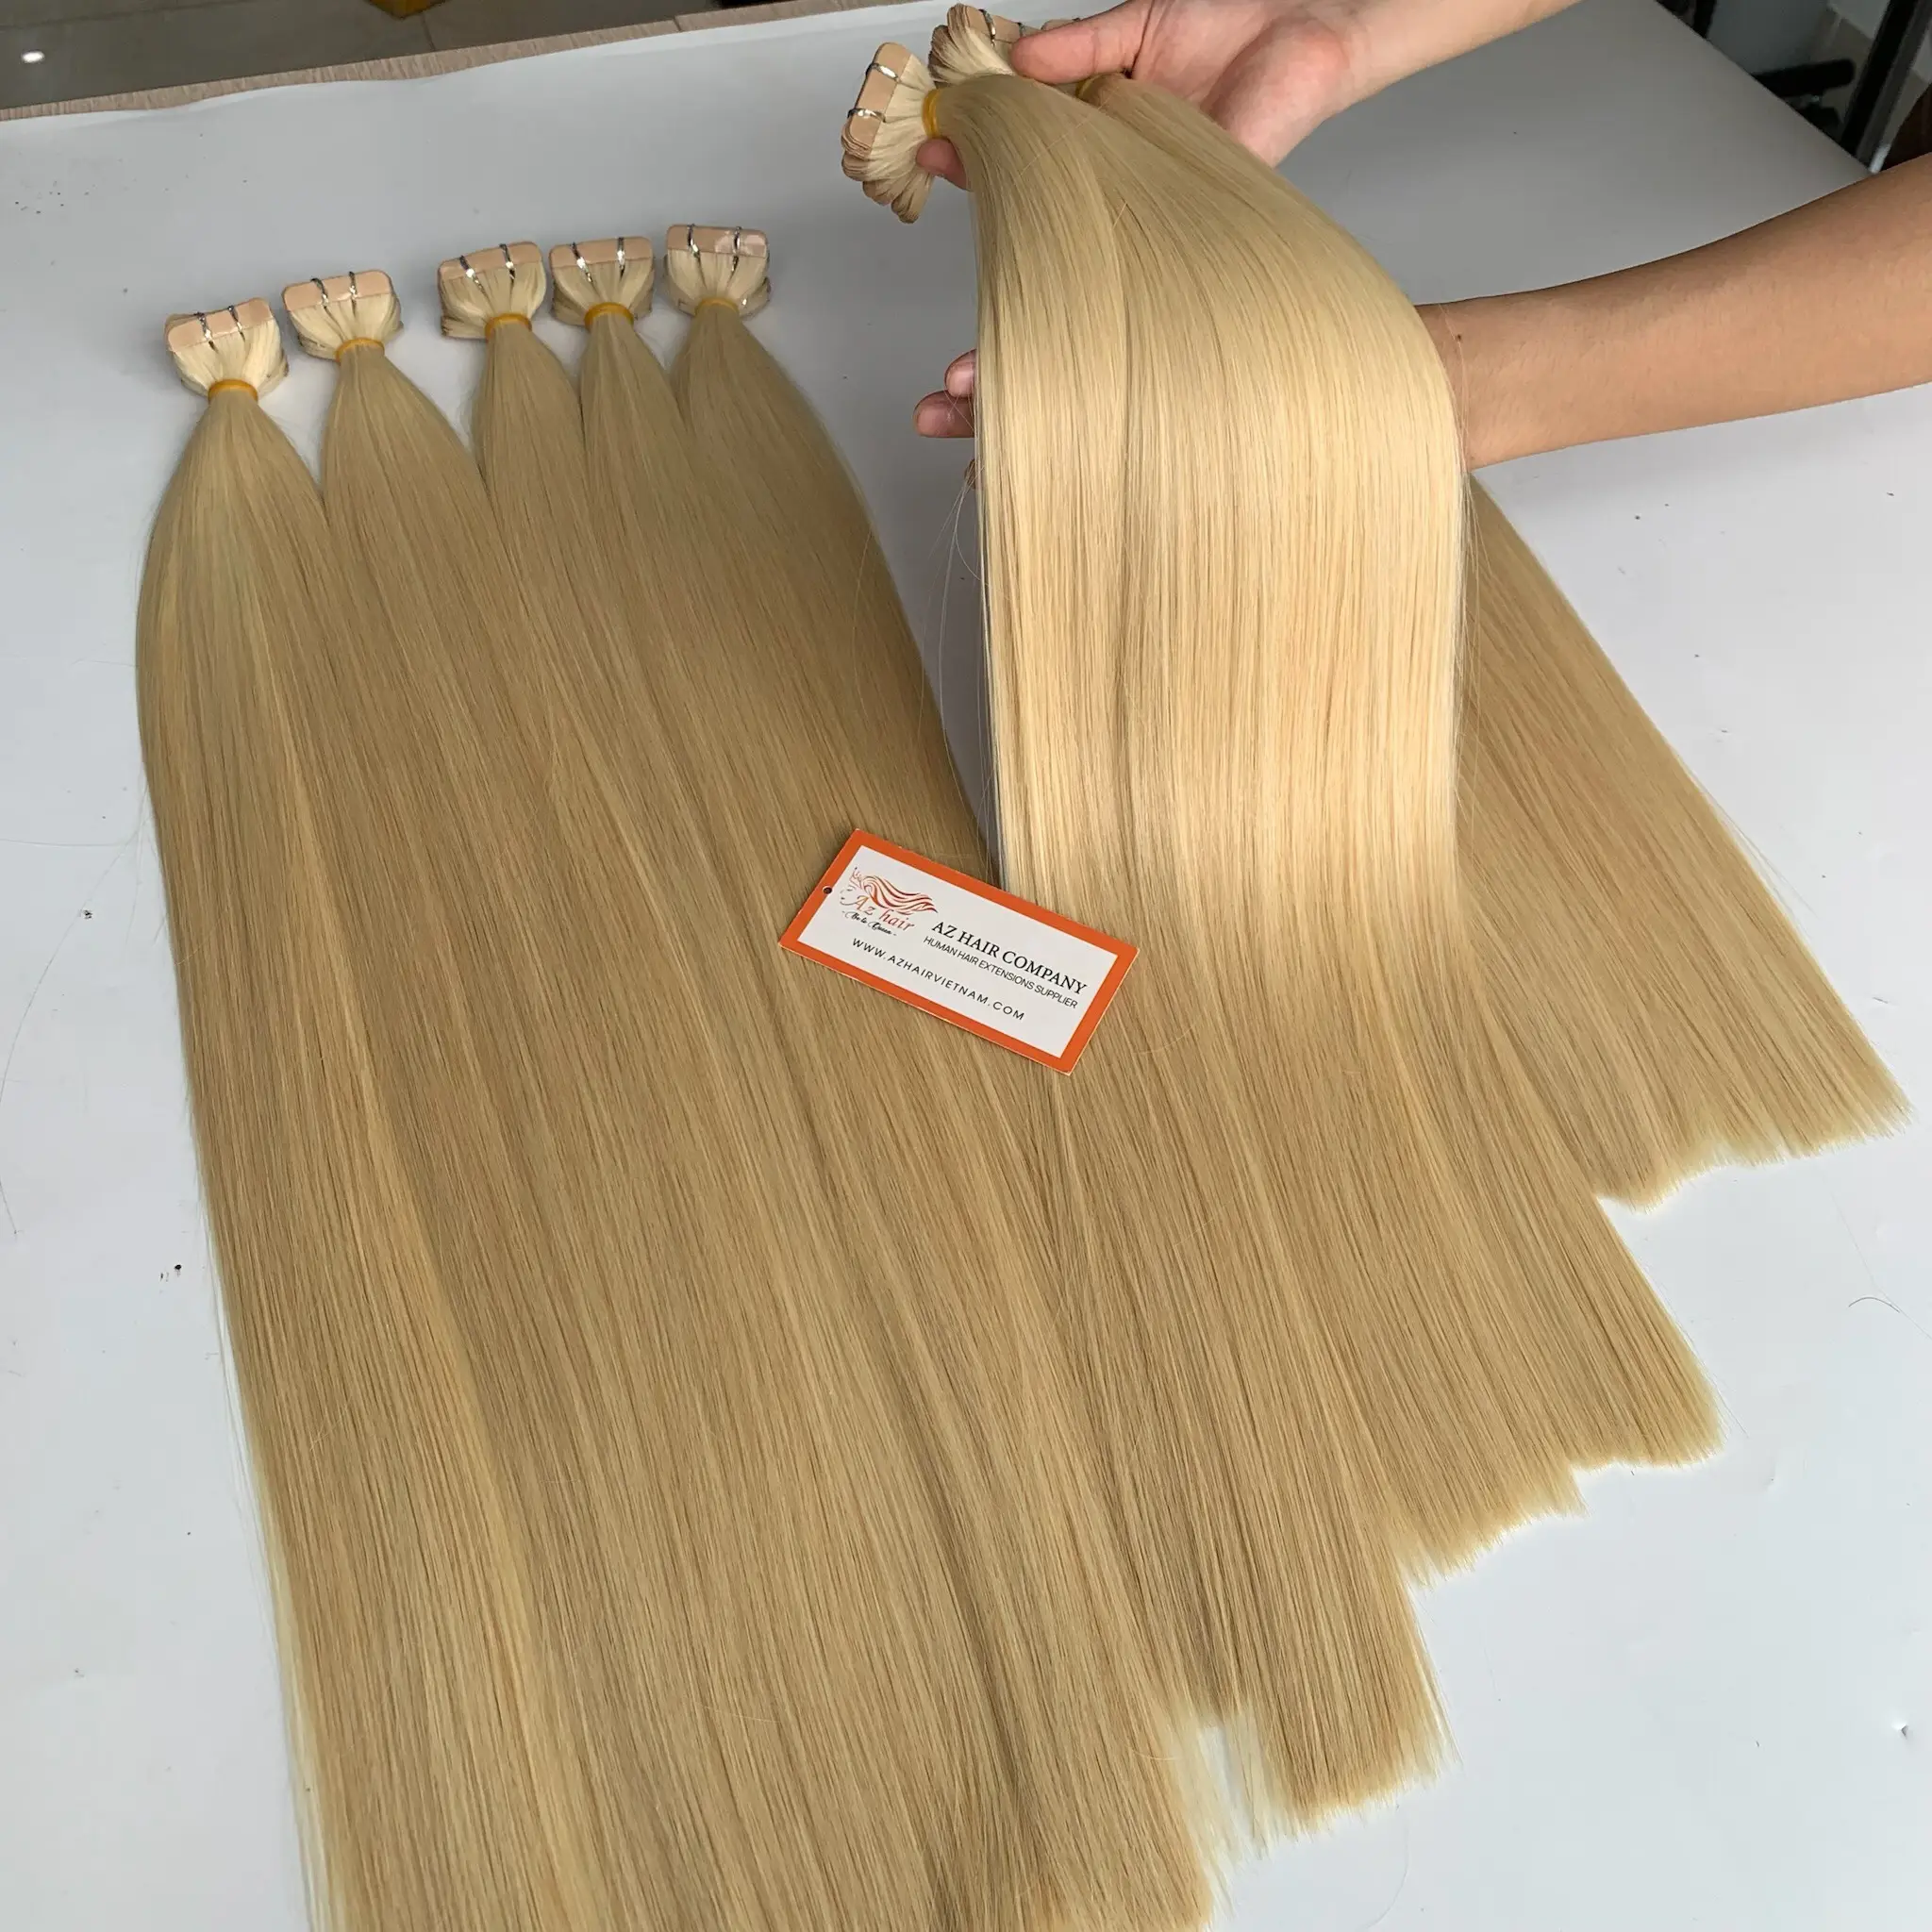 12A Invisible European 100% Raw Human Hair Extensions Natural Tape in Virgin Hair Extensions Wholesale Supplier Hair Extensions